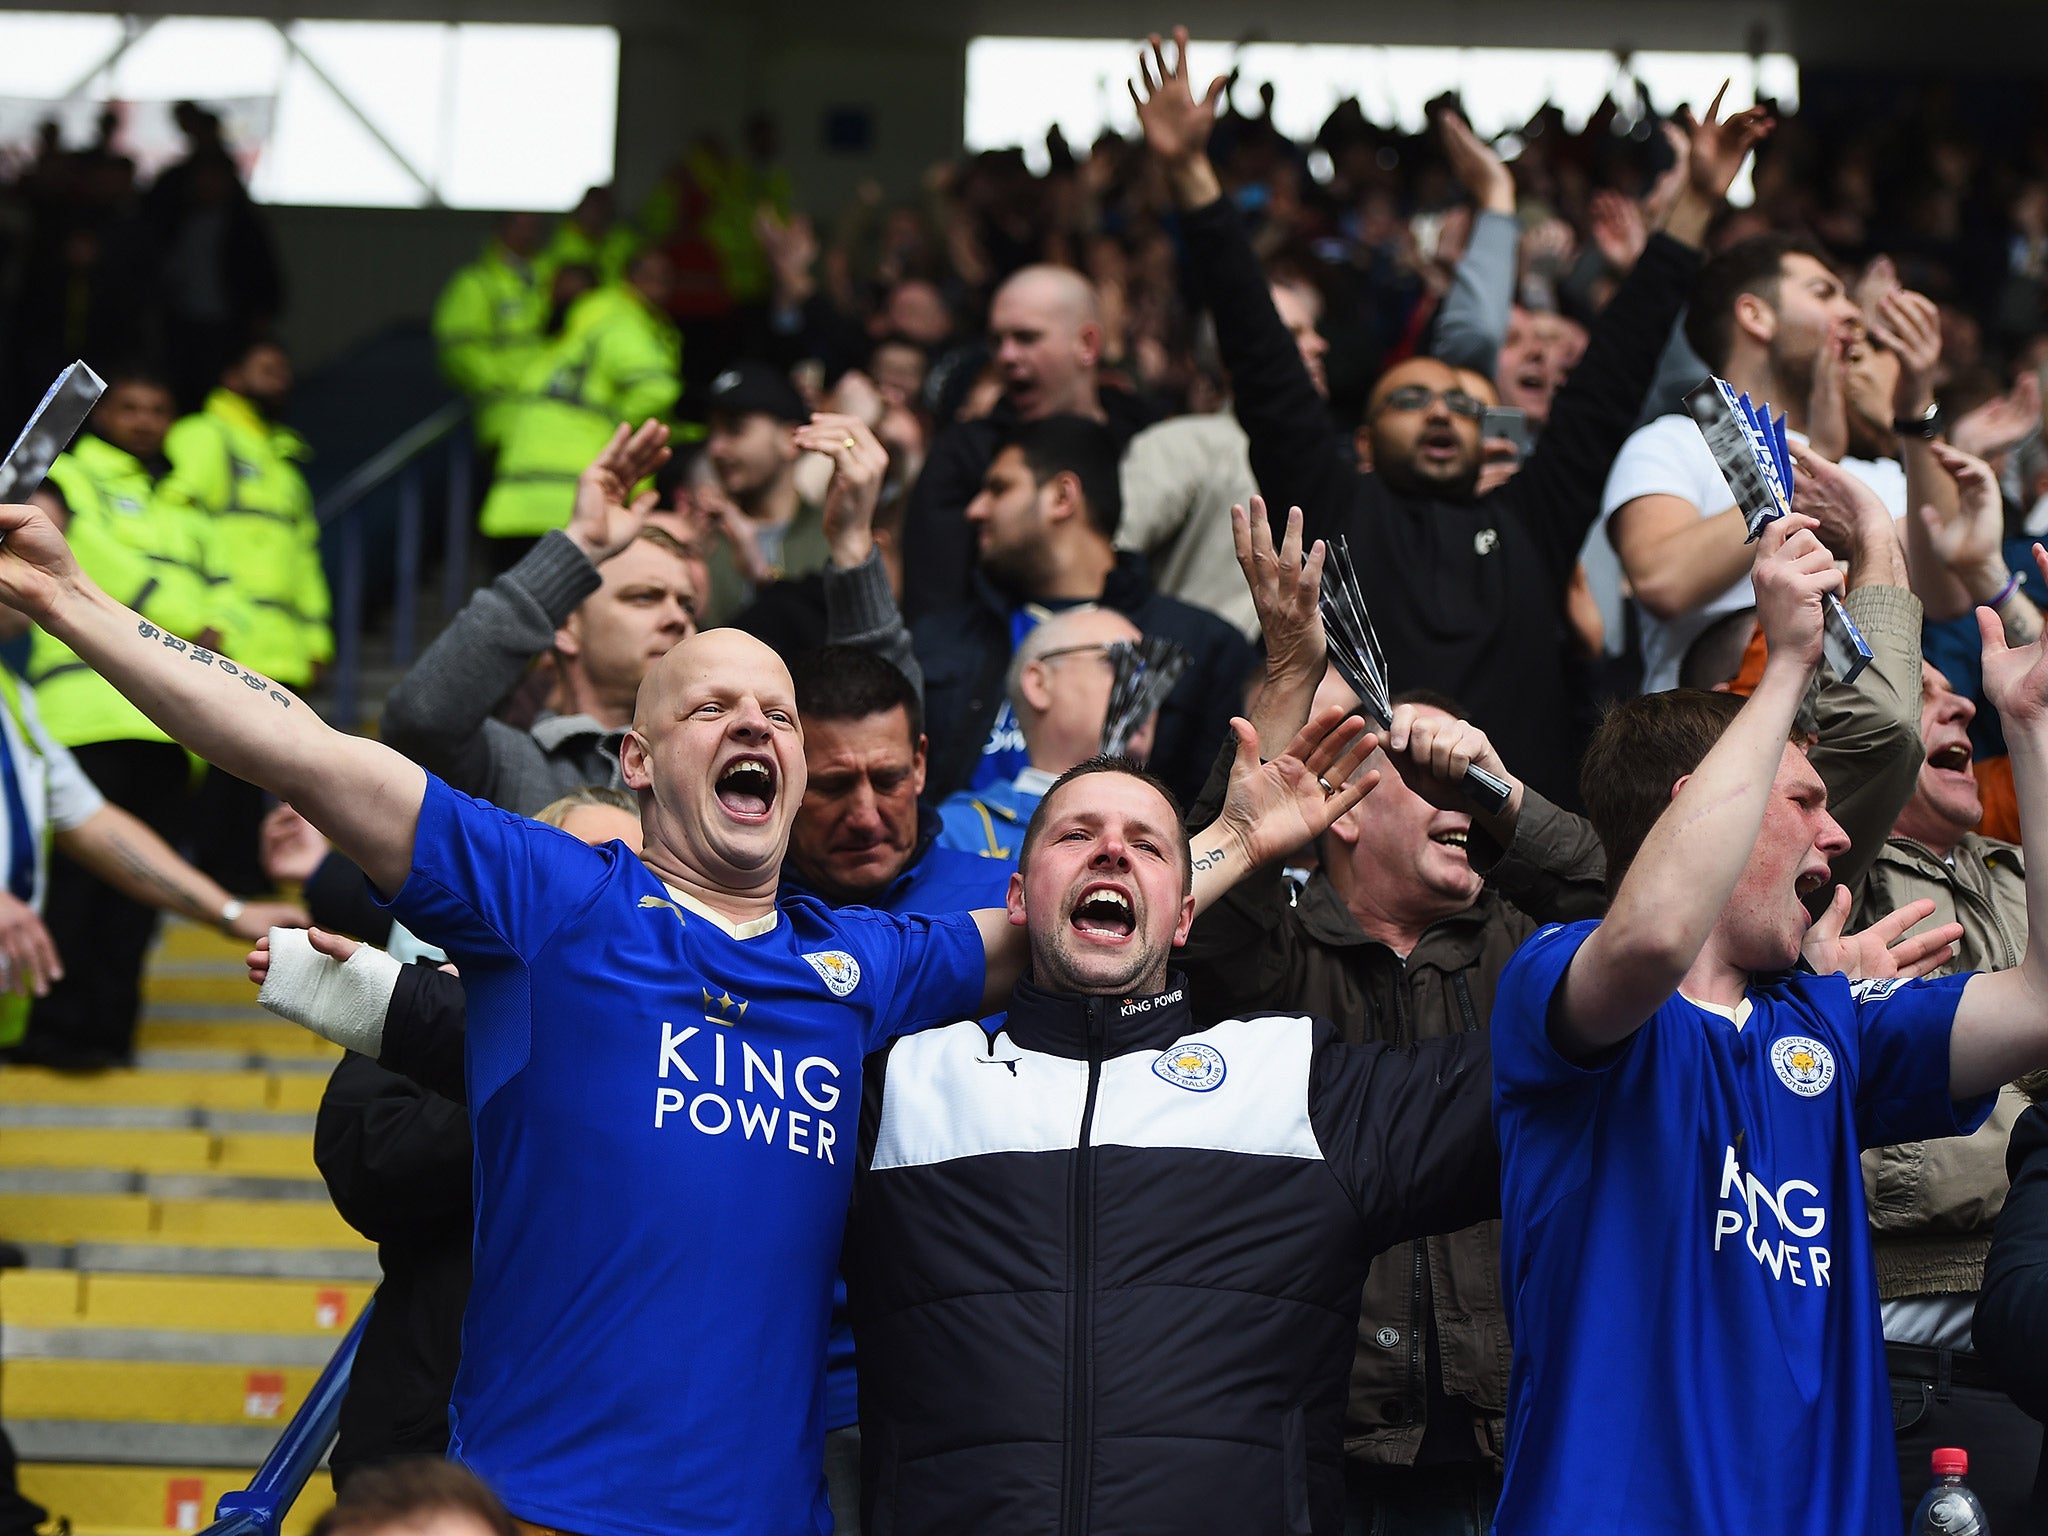 Leicester fans a facing huge price hikes for their final game against Everton